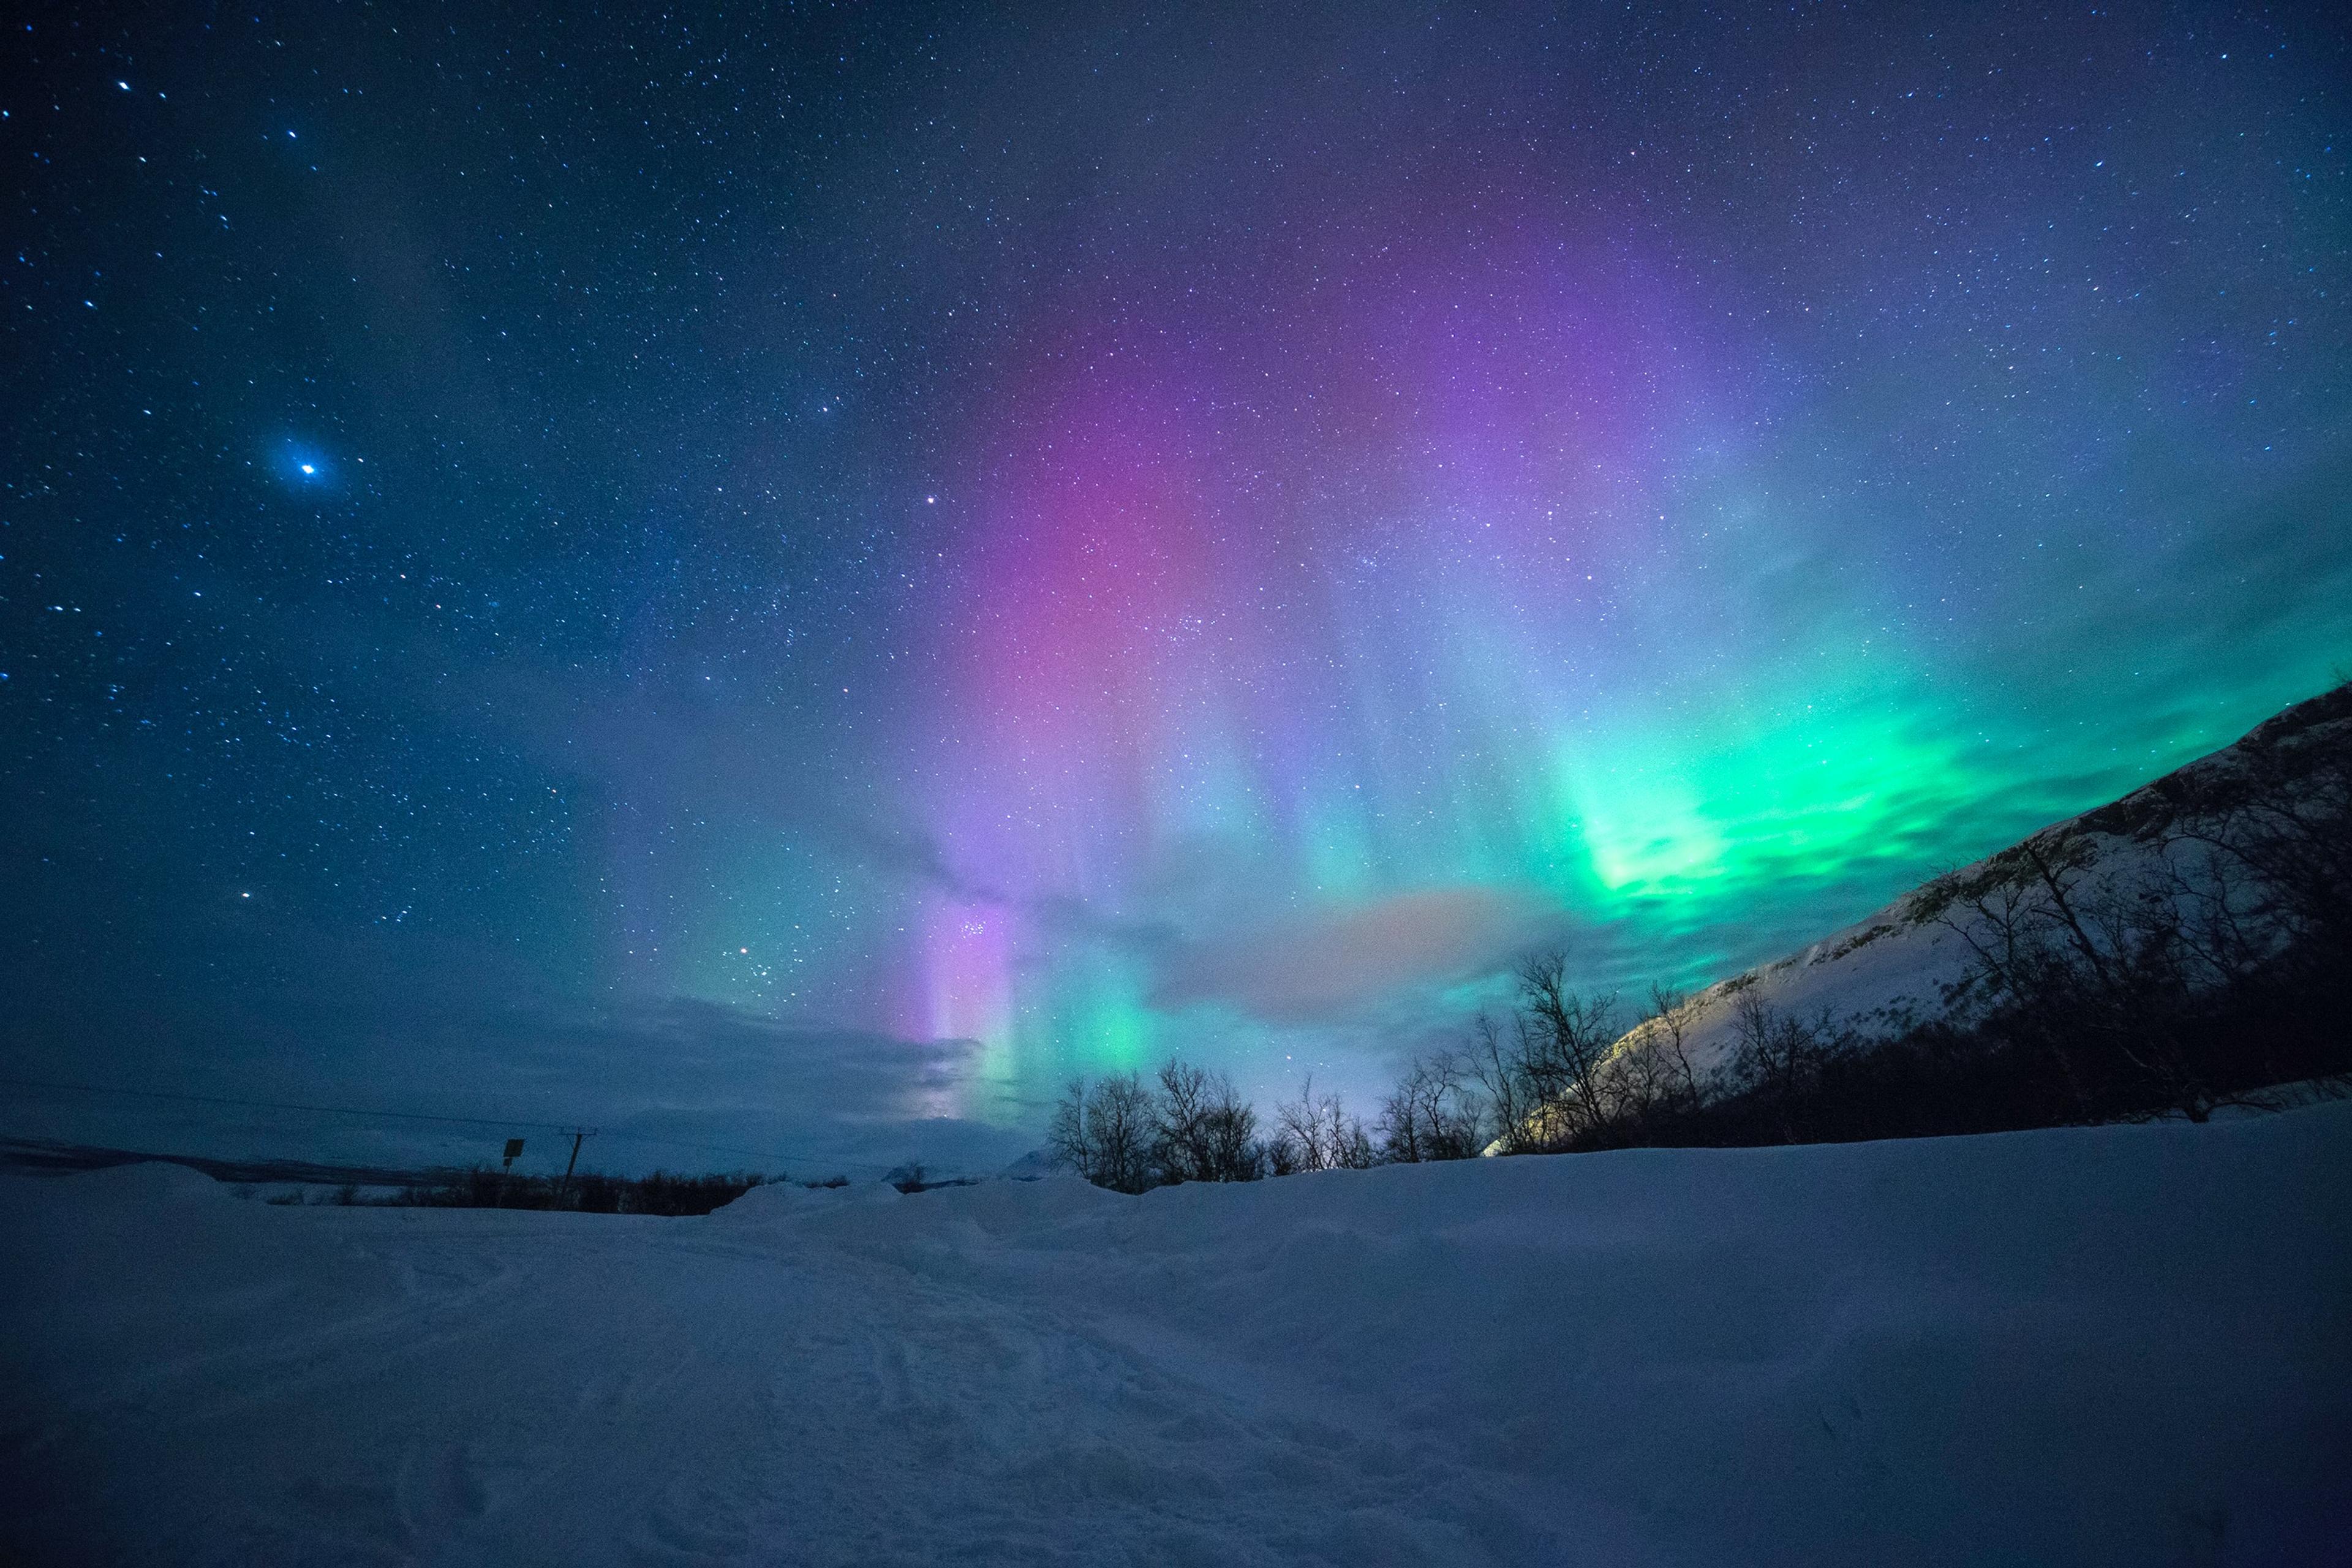 A breathtaking display of the Northern Lights in a spectrum of pink, green, and purple hues over a snowy landscape, with stars twinkling in the vast night sky.